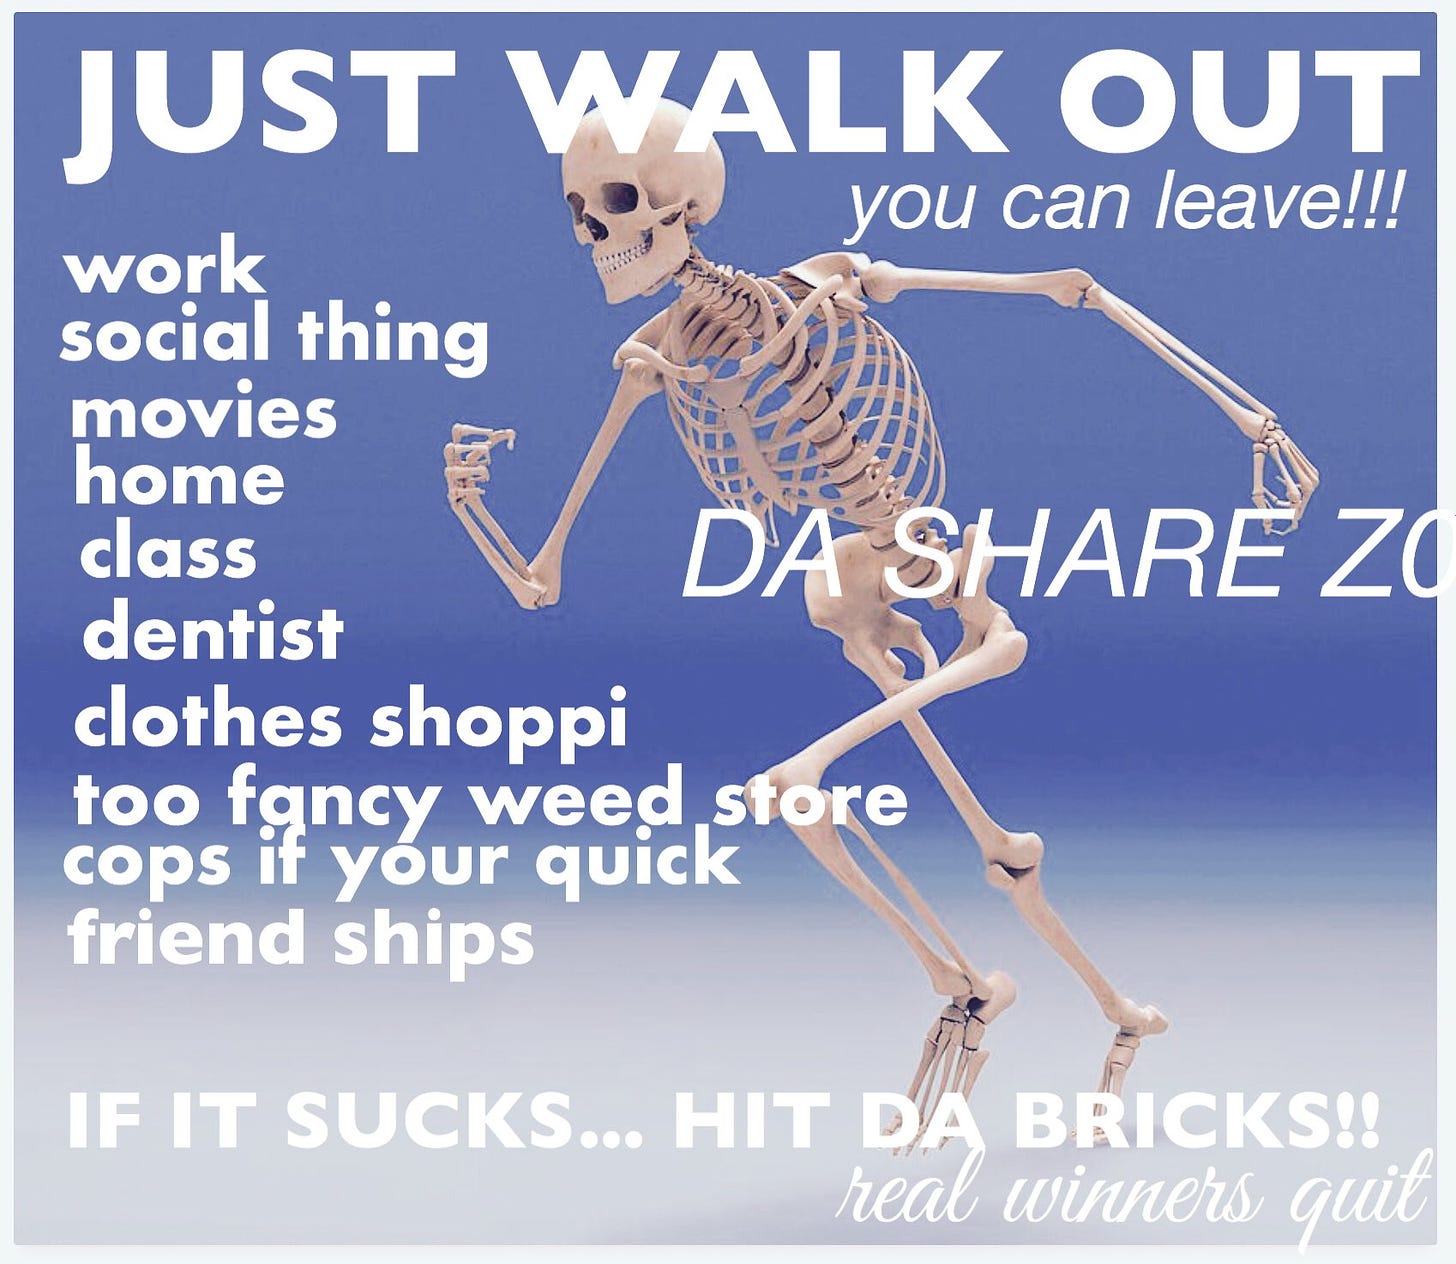 Walking skeleton with the text: "JUST WALK OUT. You can leave!!! If it sucks... hit da bricks! Real winners quit."